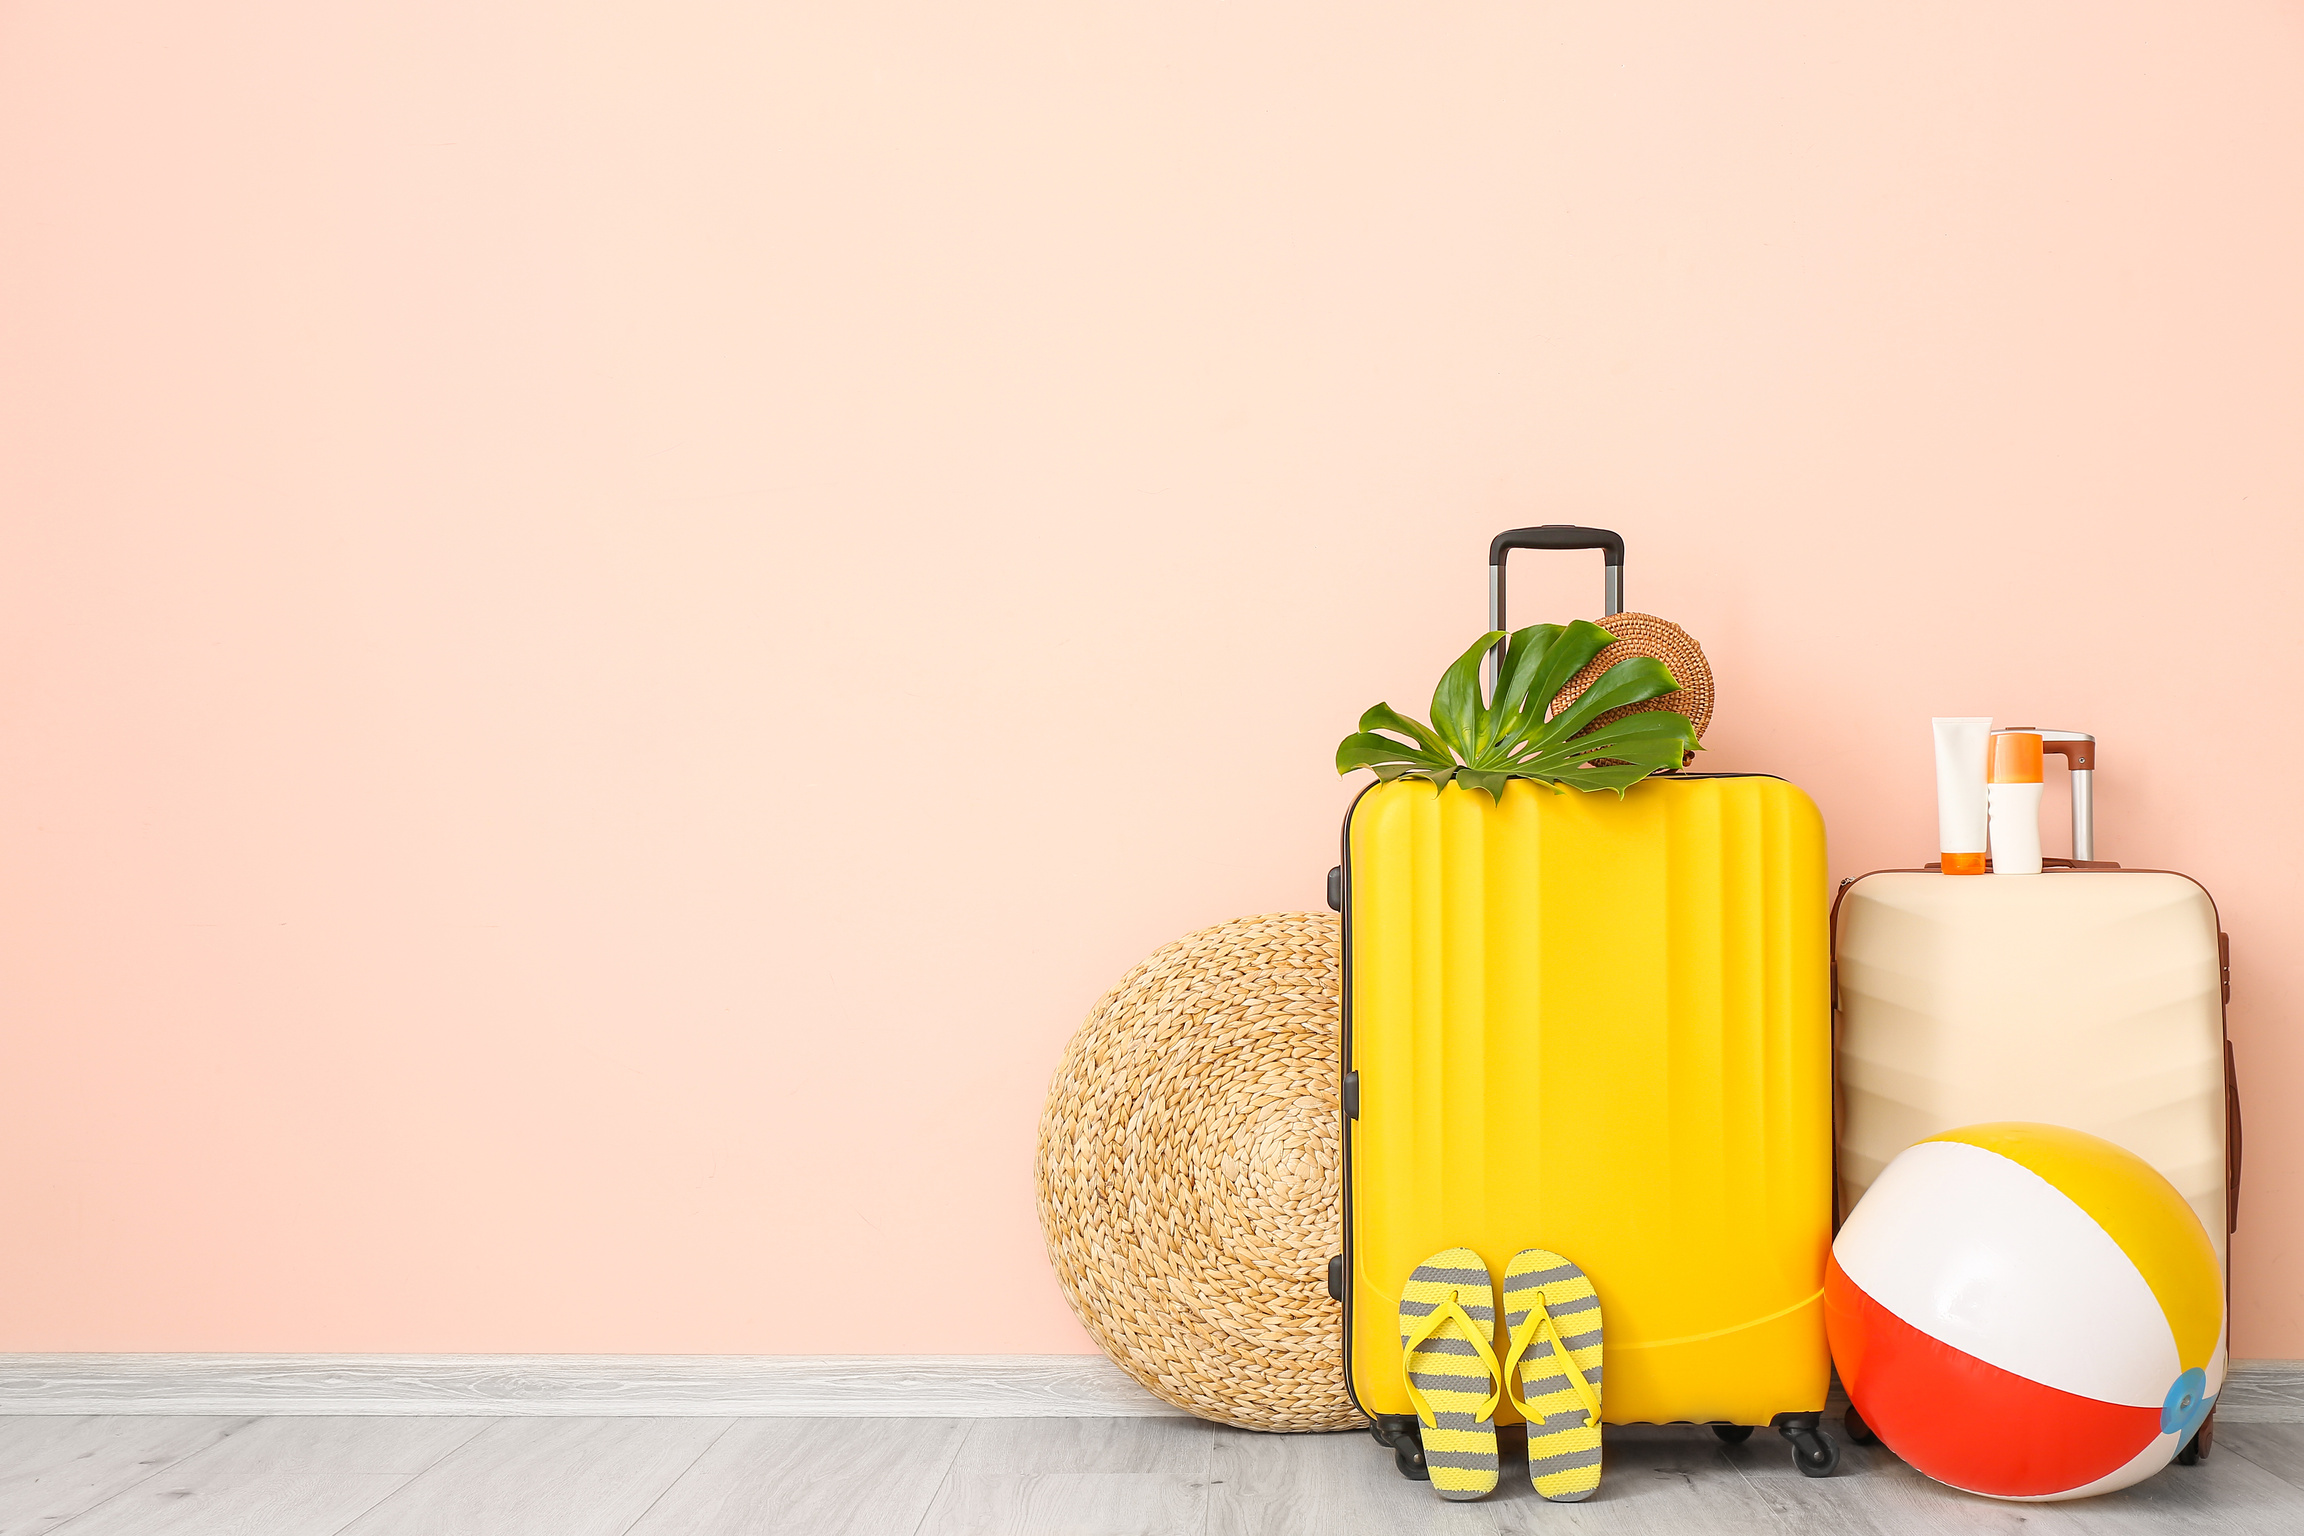 Packed Suitcases for Summer Travel near Pink Wall